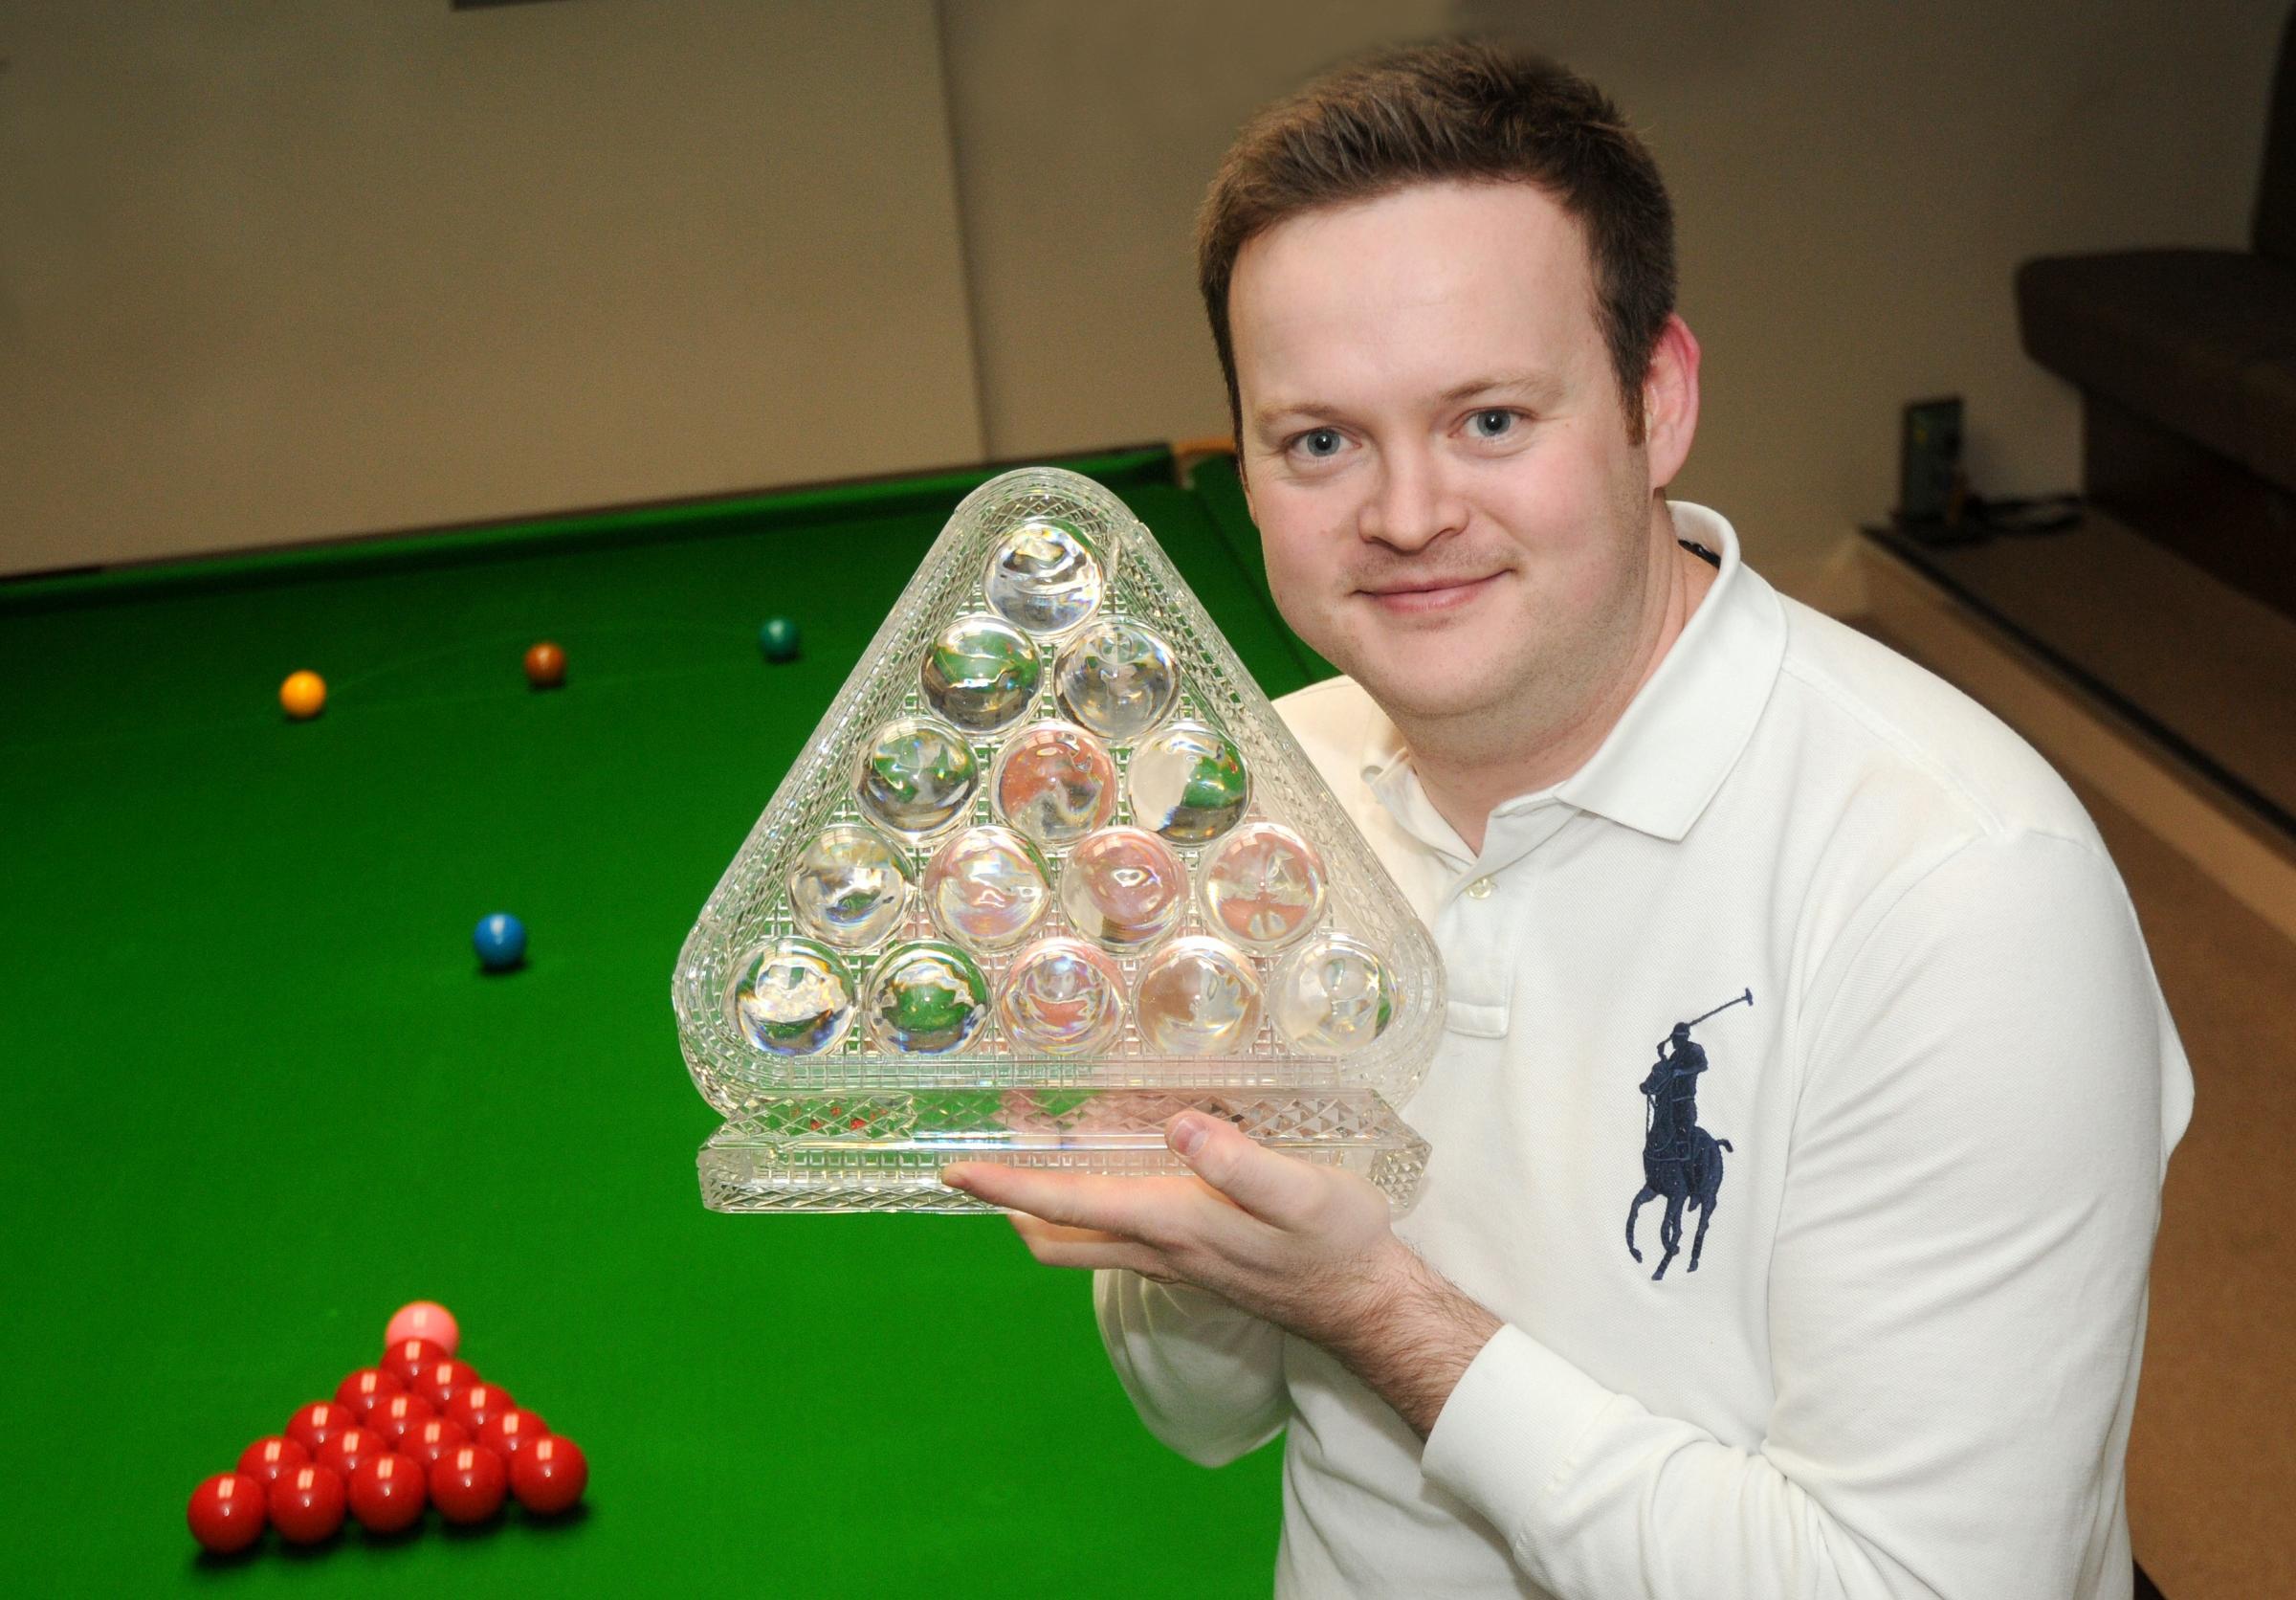 Trafford snooker champion shows off his latest title Messenger Newspapers